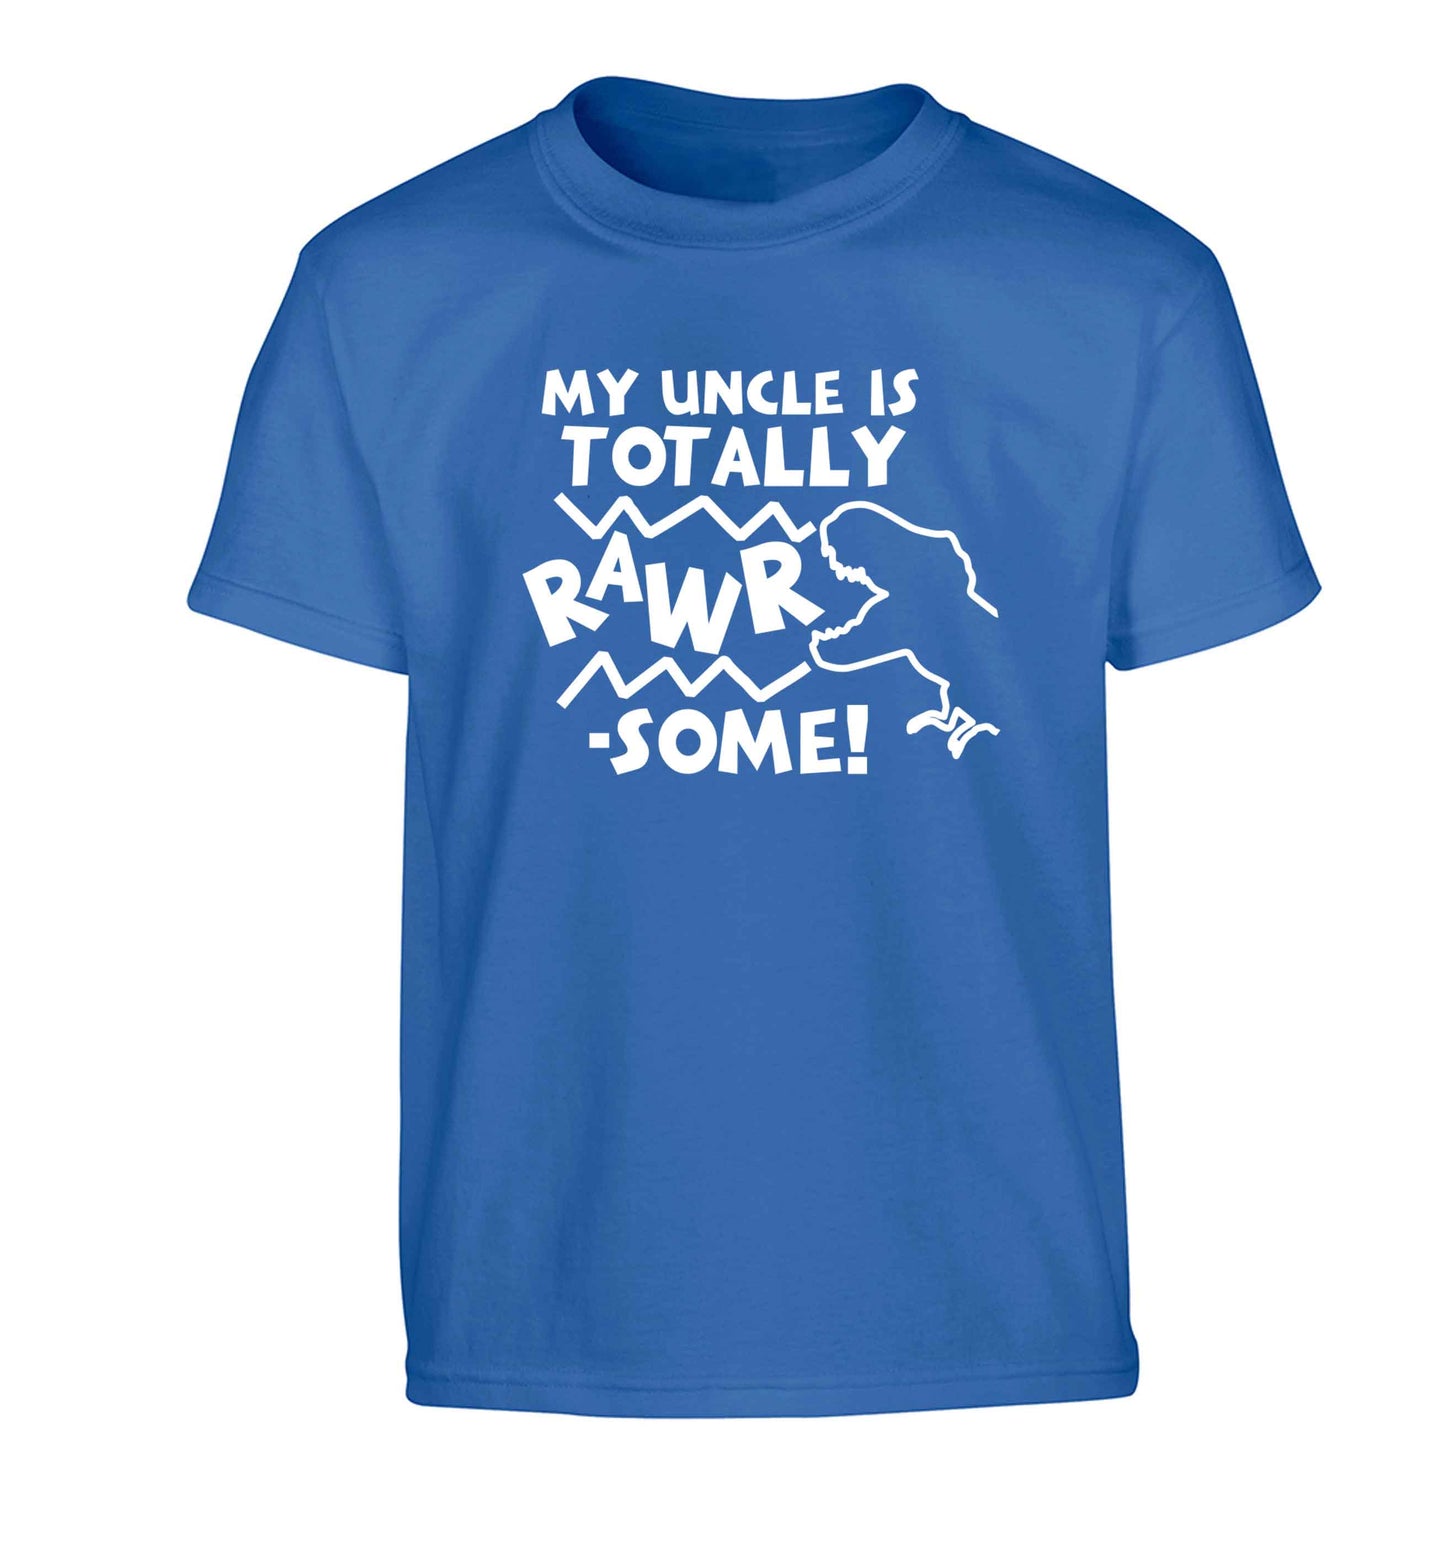 My uncle is totally rawrsome Children's blue Tshirt 12-13 Years